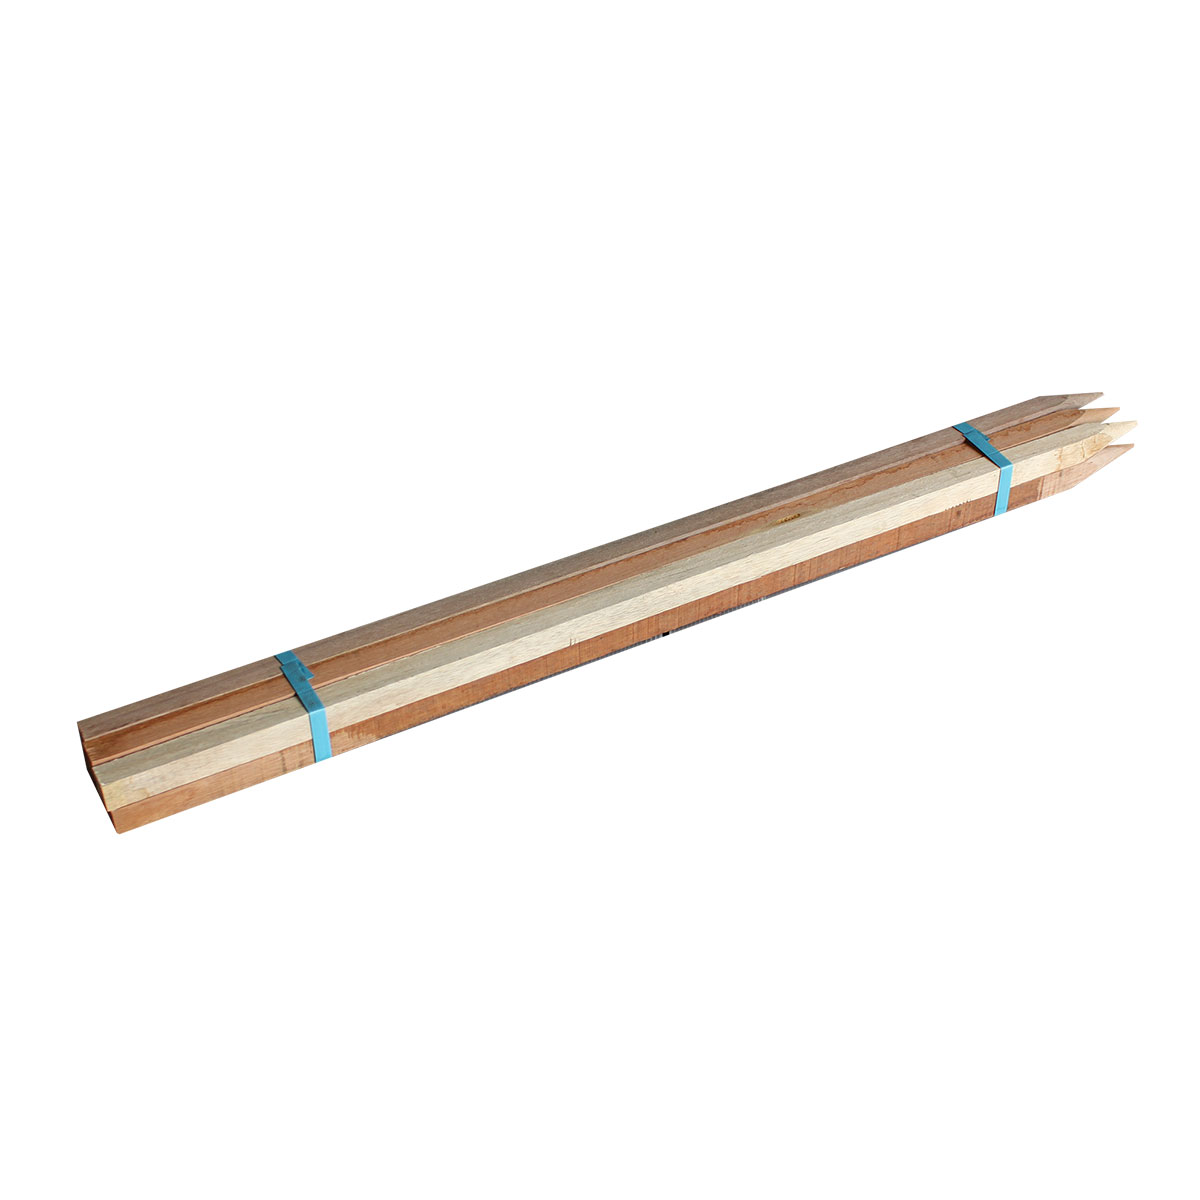 Hardwood Stakes 25 x 25 x 1500mm - 6 Pack